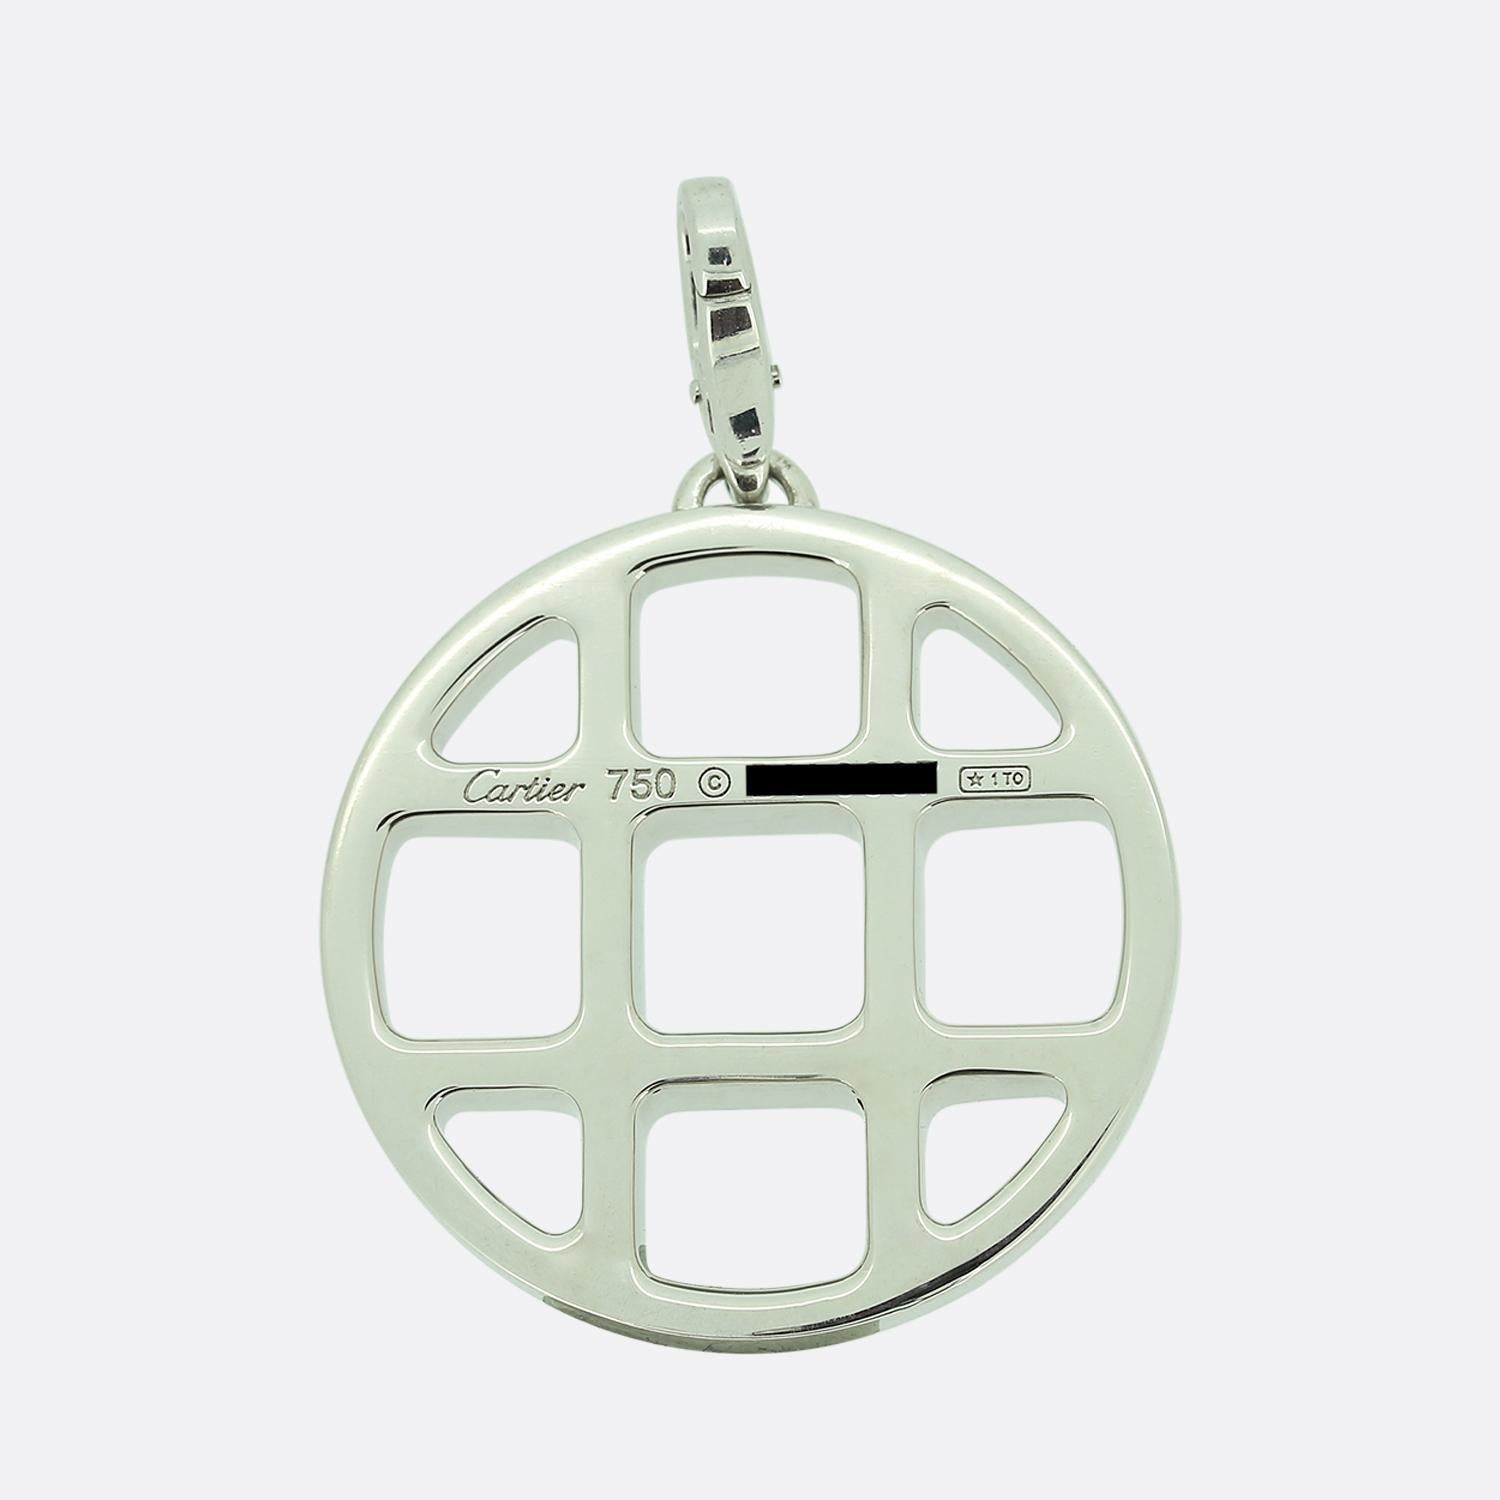 Here we have a sleek and stylish pendant from the world renowned luxury jewellery house of Cartier. This pendant has been crafted from 18ct white gold into a circular shape with an open criss cross design at the centre; complete with a high polish